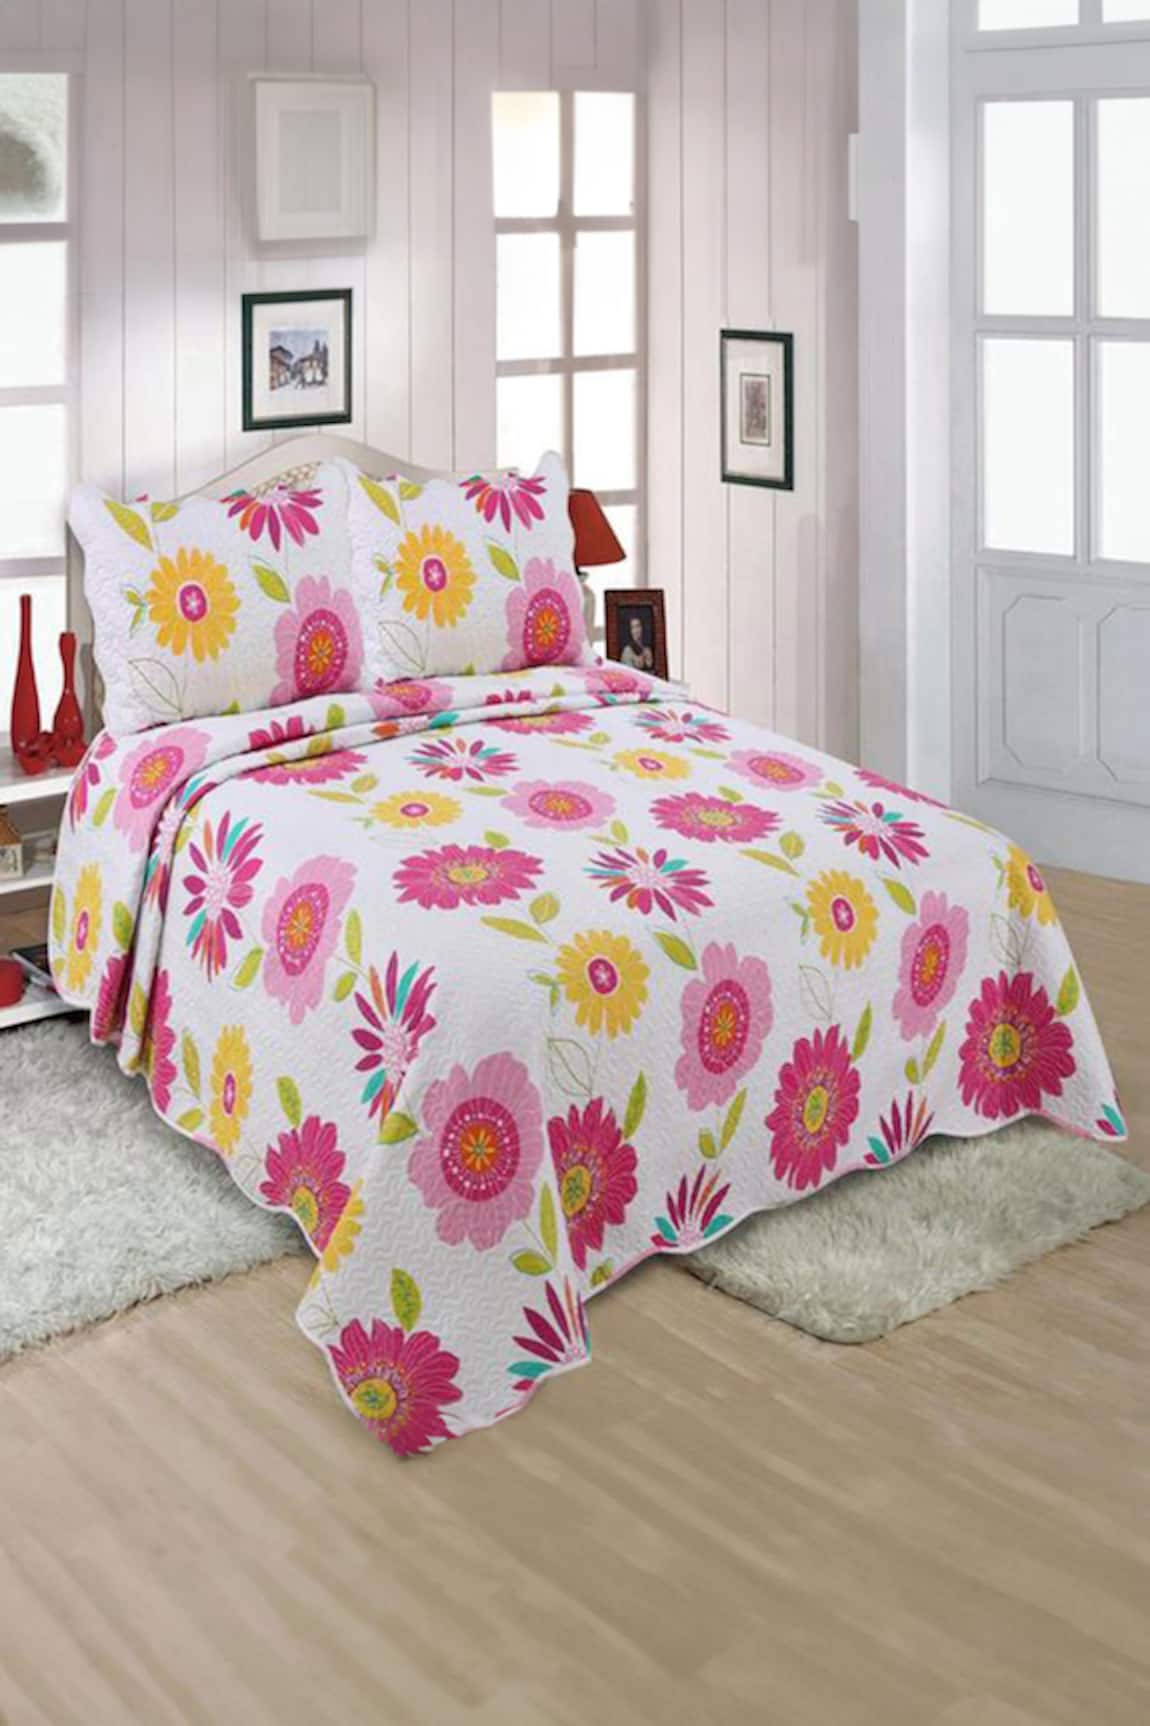 Quliting Tree Flower Bud Print Quilt With Pillow Covers